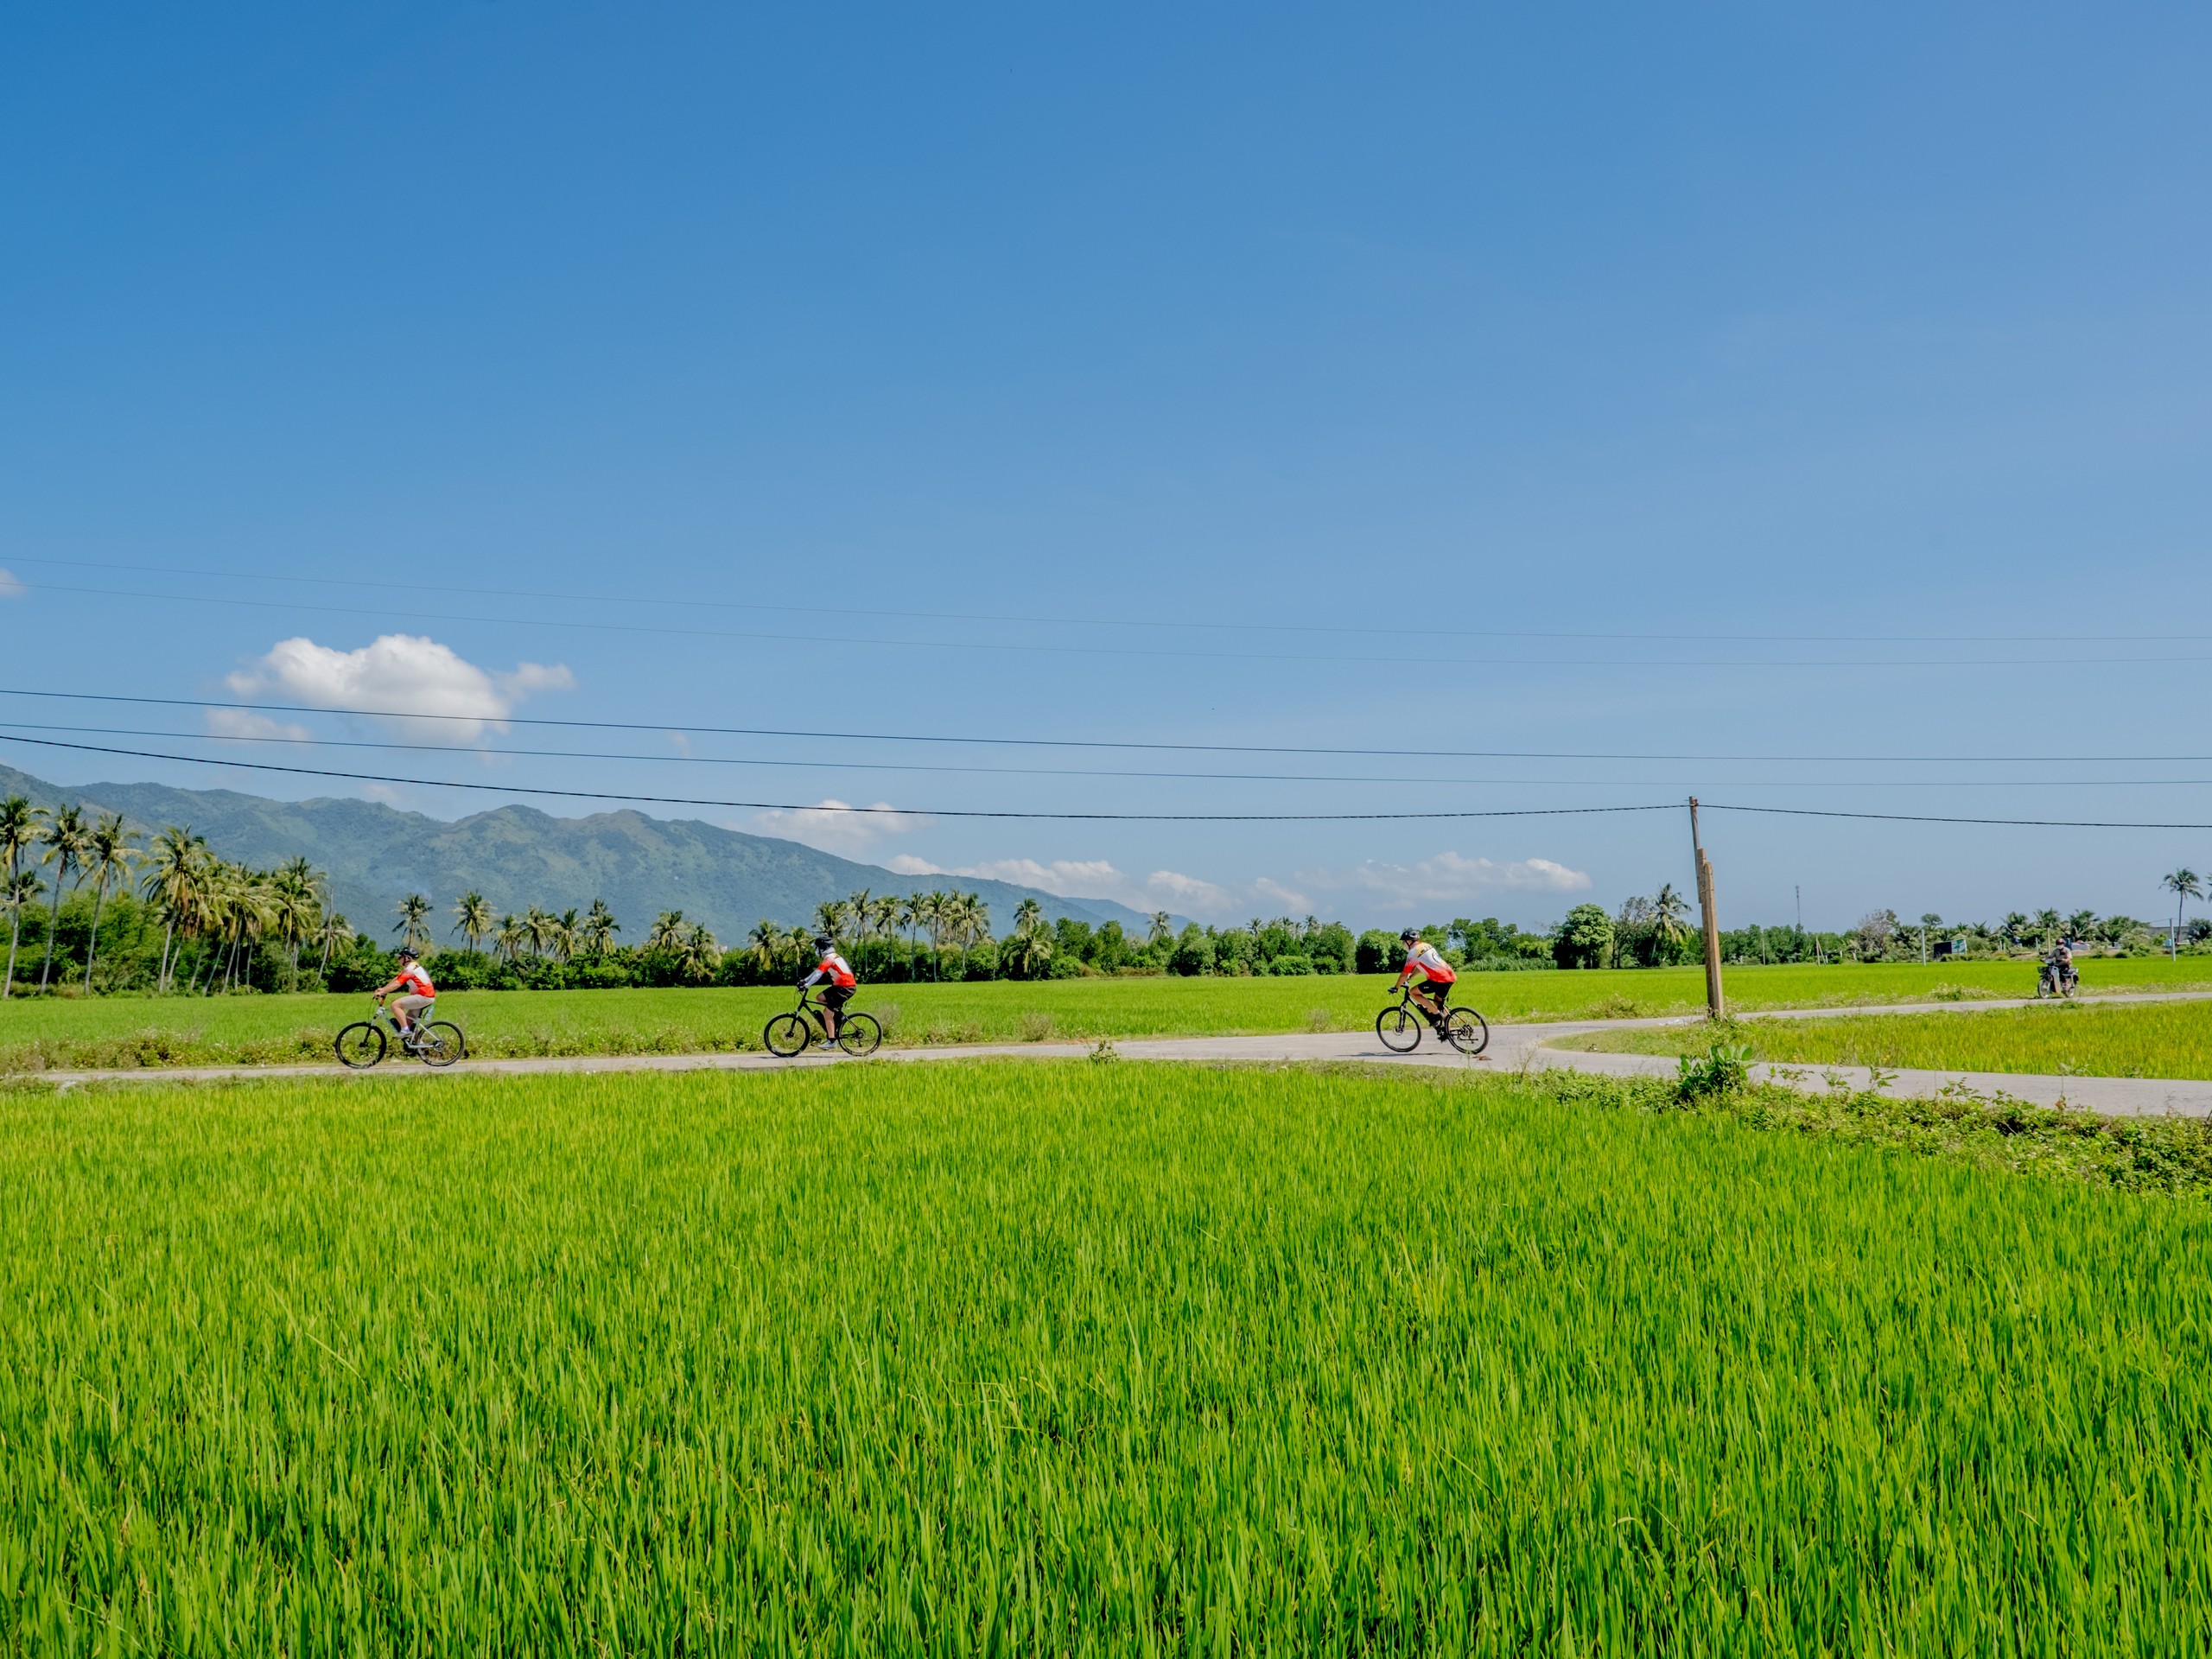 Group of cyclists riding between Ho Chi Minh City and Hanoi